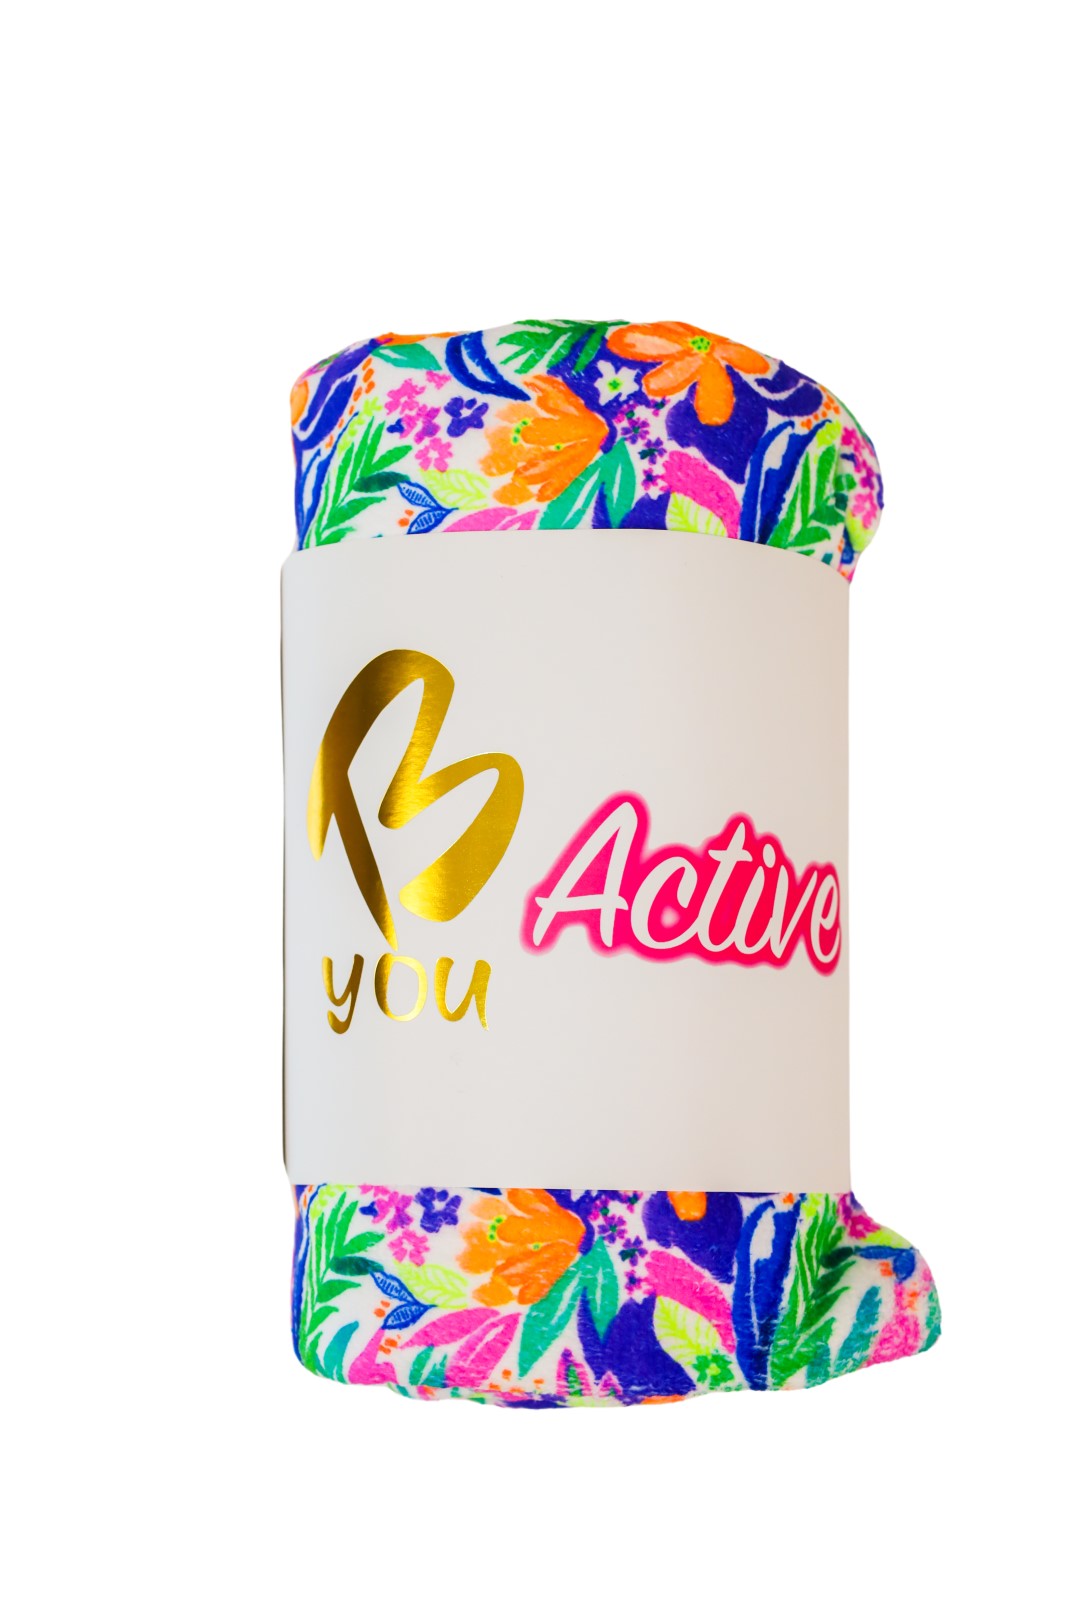 Tropical Swim Towel for Active and Sporty Girls. Rectangle Towel. Girls Matching Swimwear and Towel Set. Gift or Present for Girls. Activewear, B you Active, B you Leotards, B you Swimwear, Fluorescent Togs, Swimwear, Bikinis. 